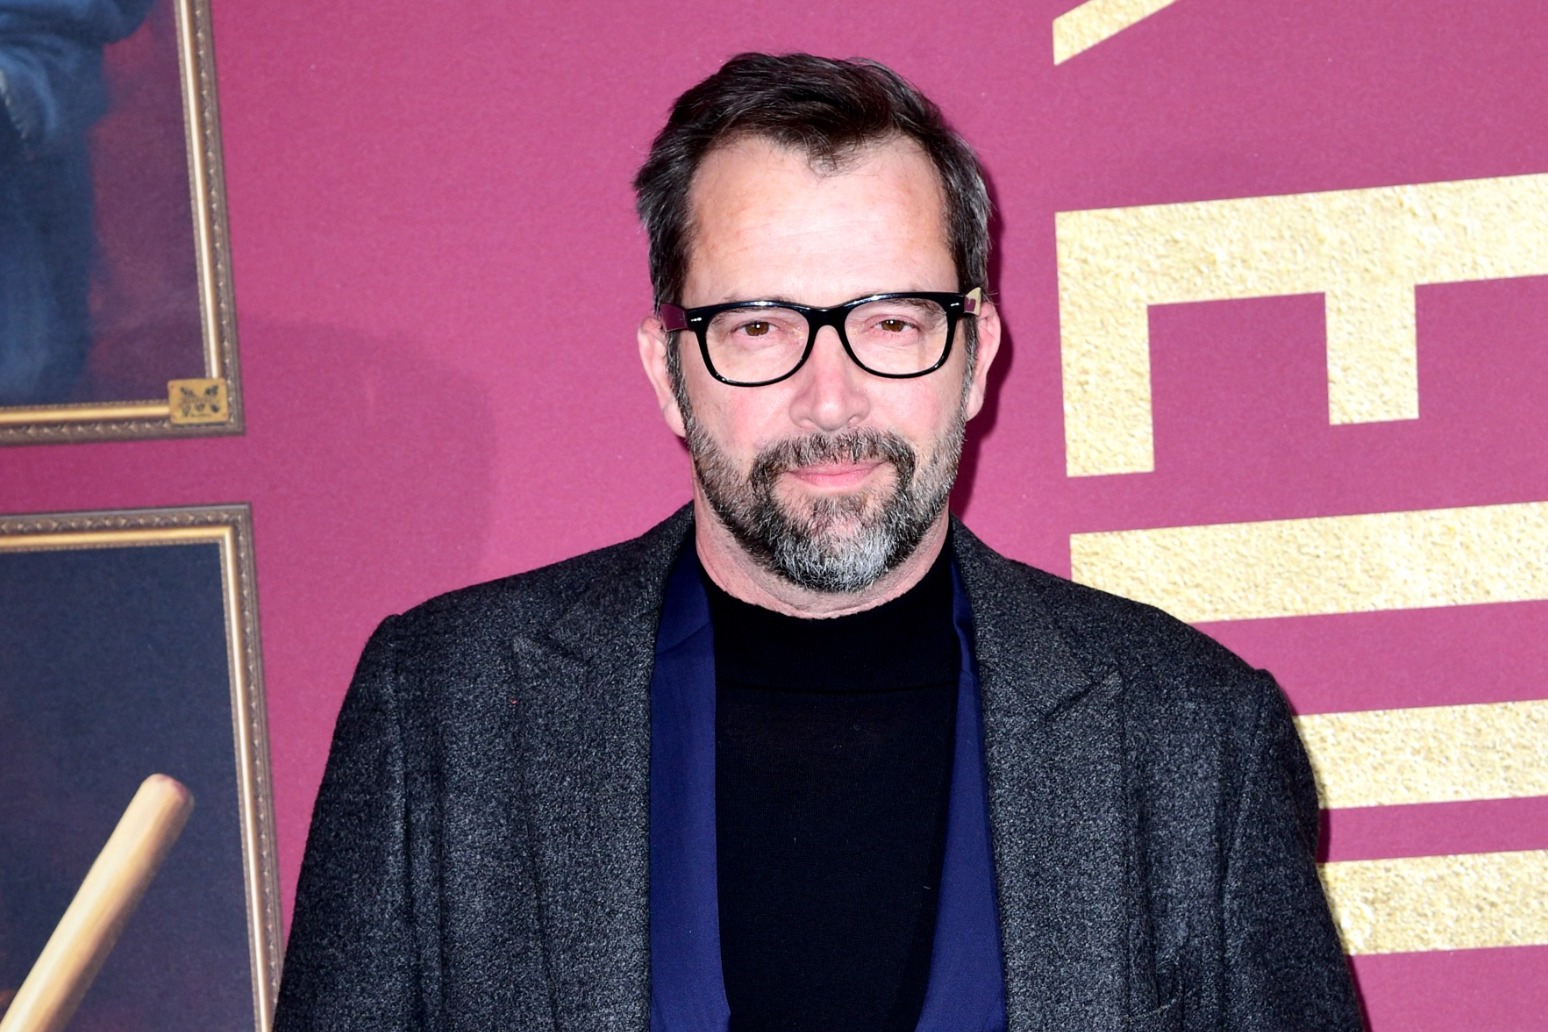 James Purefoy discusses ‘jigsaw of mental health’ in light of latest film 